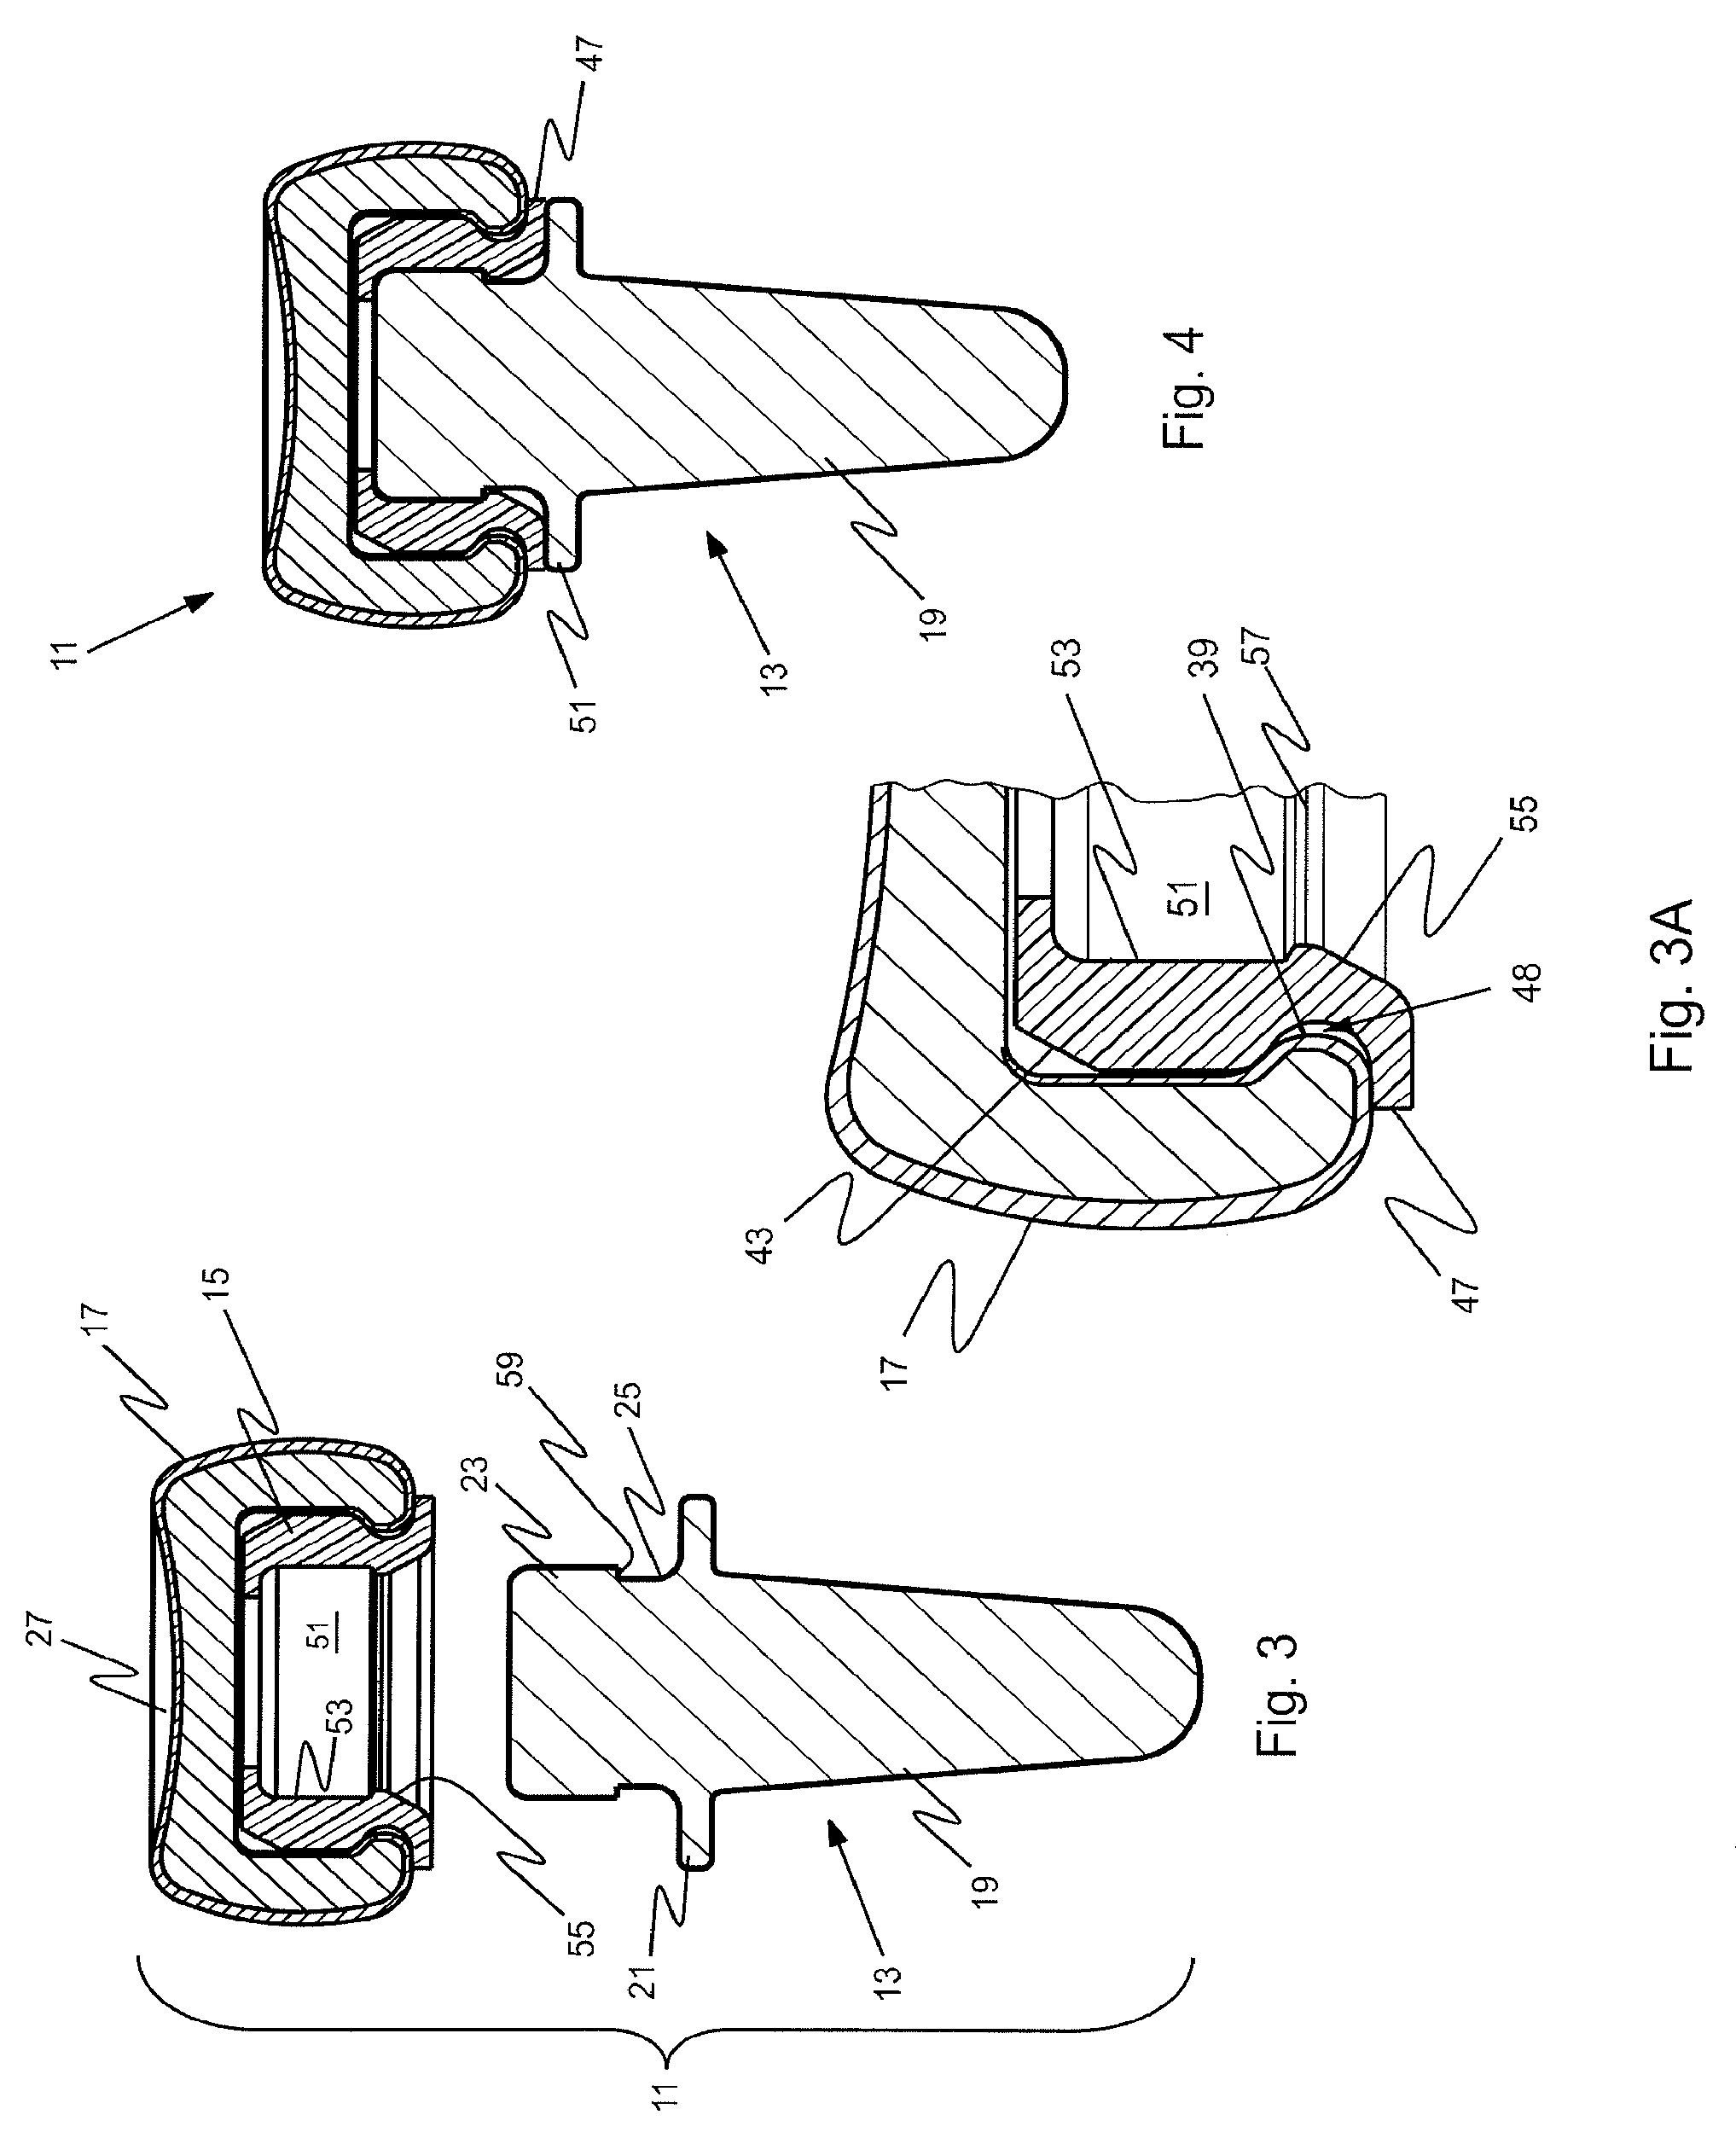 Prosthetic implant and assembly method